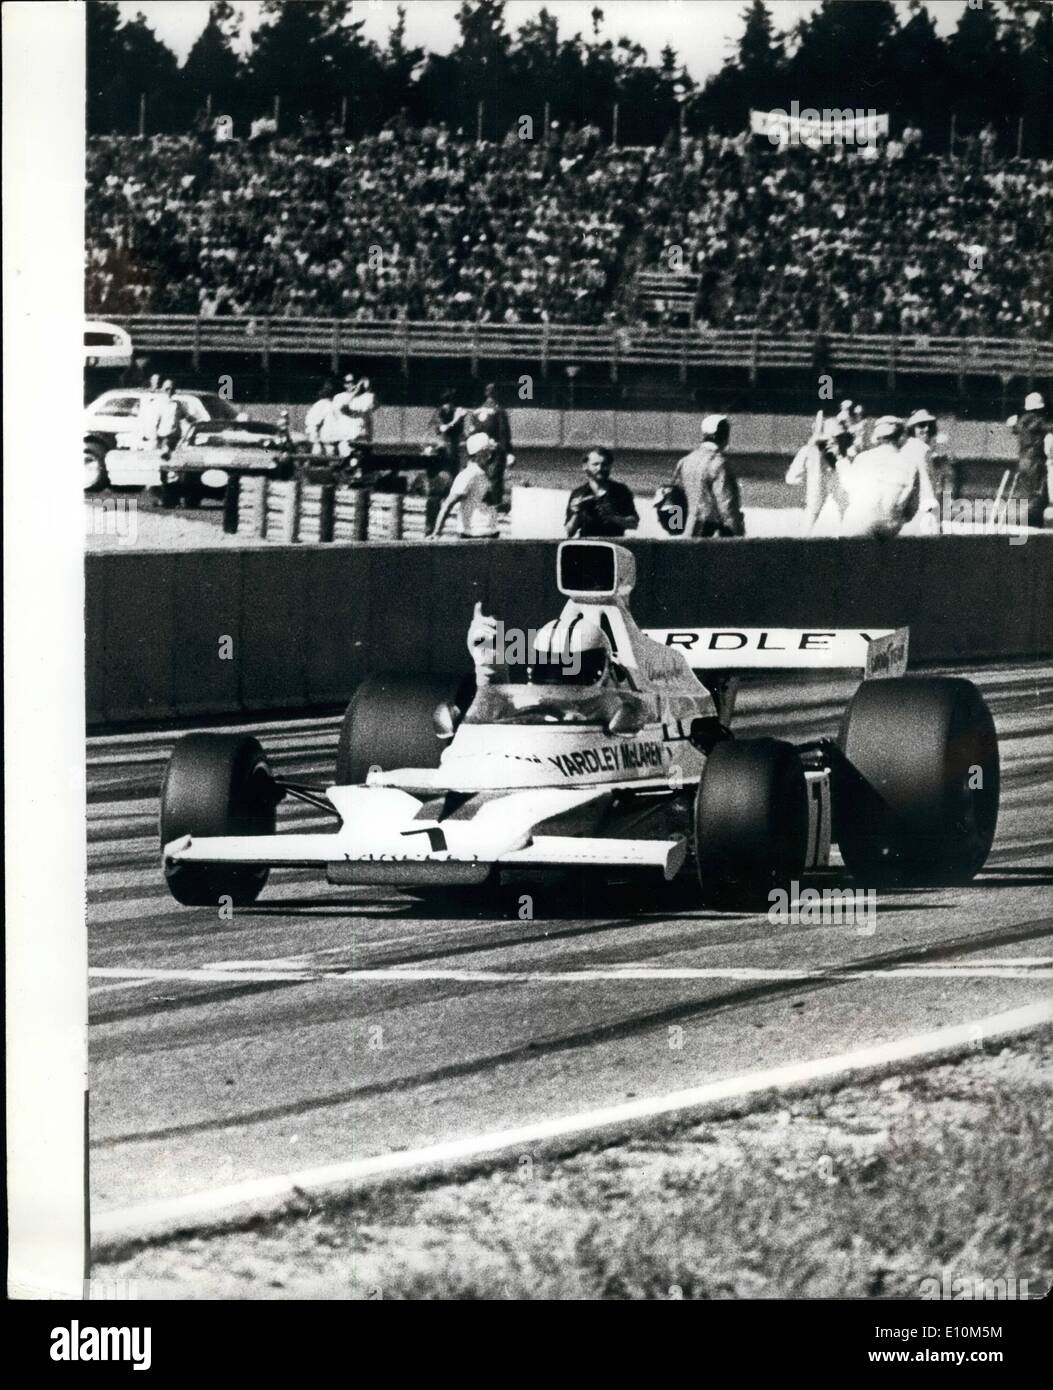 Jun. 06, 1973 - DANNY HUME OF NEW ZEALAND WINS THE SWEDISH GRAND PRIX DENNY HUME the New Zealand racind driver driving a Mclaren won the Swedish Grand Prix in Anderstorp Sweden on Sunday. Photo Shows DENNY HUME seen crossing the line to win the Swedish Grand Prix,2nd was Ronnie Peterson,of Sweden,and third Francois Cevert of France. Stock Photo